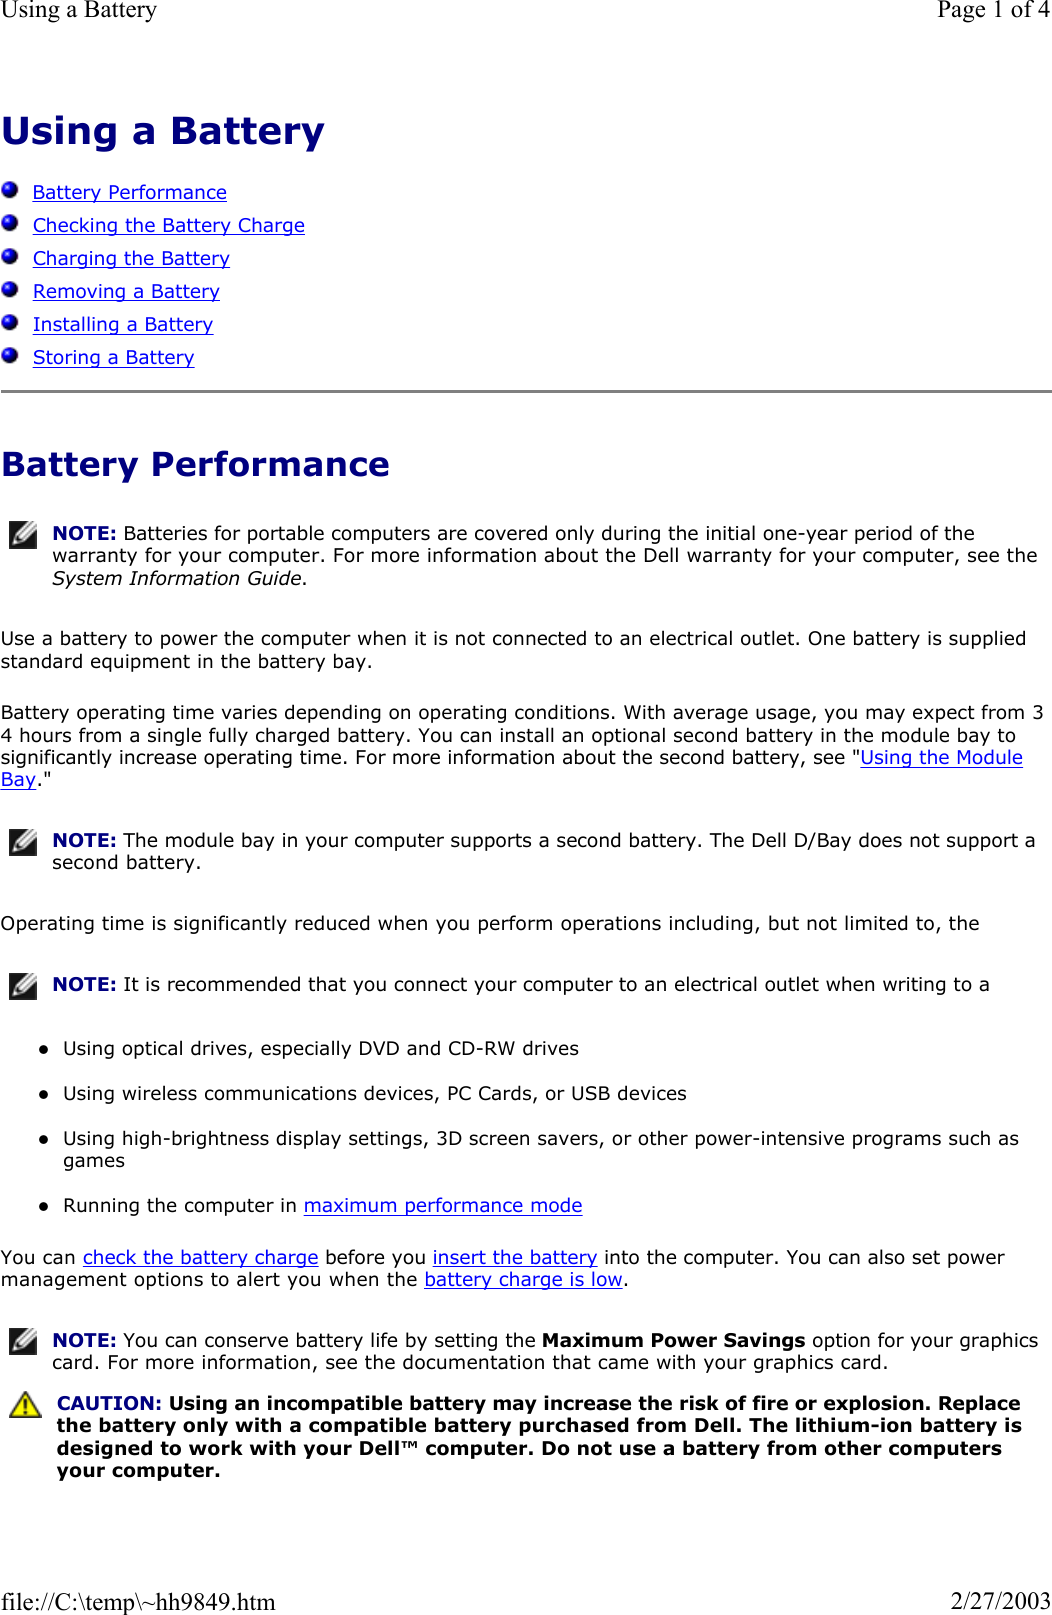 Using a BatteryBattery PerformanceChecking the Battery ChargeCharging the BatteryRemoving a BatteryInstalling a BatteryStoring a BatteryBattery Performance Use a battery to power the computer when it is not connected to an electrical outlet. One battery is supplied standard equipment in the battery bay. Battery operating time varies depending on operating conditions. With average usage, you may expect from 3 4 hours from a single fully charged battery. You can install an optional second battery in the module bay to significantly increase operating time. For more information about the second battery, see &quot;Using the Module Bay.&quot; Operating time is significantly reduced when you perform operations including, but not limited to, the zUsing optical drives, especially DVD and CD-RW drives zUsing wireless communications devices, PC Cards, or USB devices zUsing high-brightness display settings, 3D screen savers, or other power-intensive programs such as games zRunning the computer in maximum performance modeYou can check the battery charge before you insert the battery into the computer. You can also set power management options to alert you when the battery charge is low.NOTE: Batteries for portable computers are covered only during the initial one-year period of the warranty for your computer. For more information about the Dell warranty for your computer, see the System Information Guide.NOTE: The module bay in your computer supports a second battery. The Dell D/Bay does not support a second battery.NOTE: It is recommended that you connect your computer to an electrical outlet when writing to a NOTE: You can conserve battery life by setting the Maximum Power Savings option for your graphics card. For more information, see the documentation that came with your graphics card.CAUTION: Using an incompatible battery may increase the risk of fire or explosion. Replace the battery only with a compatible battery purchased from Dell. The lithium-ion battery is designed to work with your Dell™ computer. Do not use a battery from other computers your computer. Page 1 of 4Using a Battery2/27/2003file://C:\temp\~hh9849.htm